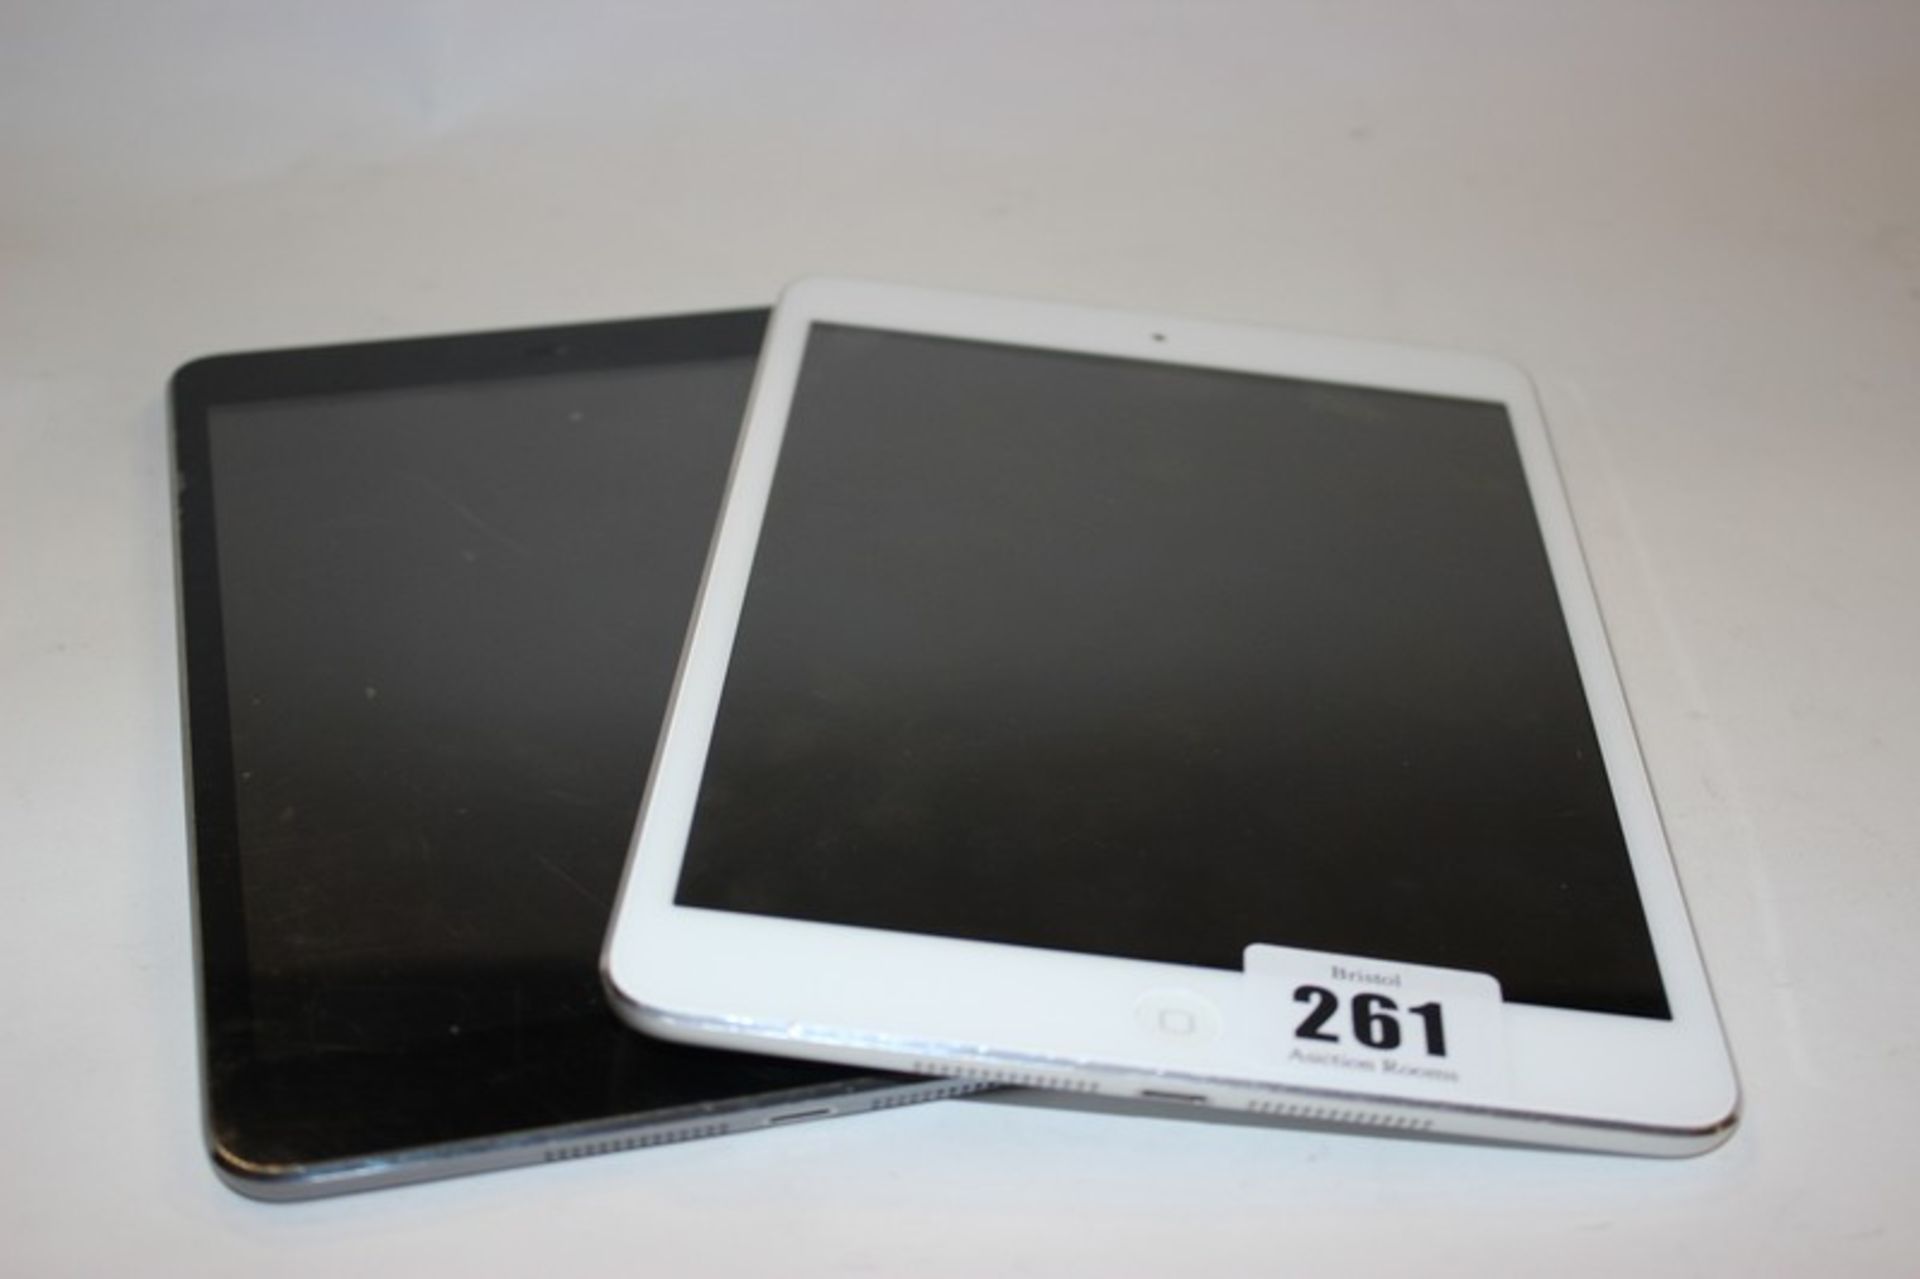 Two iPad Mini A1432 serial: F7PMP0L1FP84 and F7NMRV5JF196 (Both activation locked).